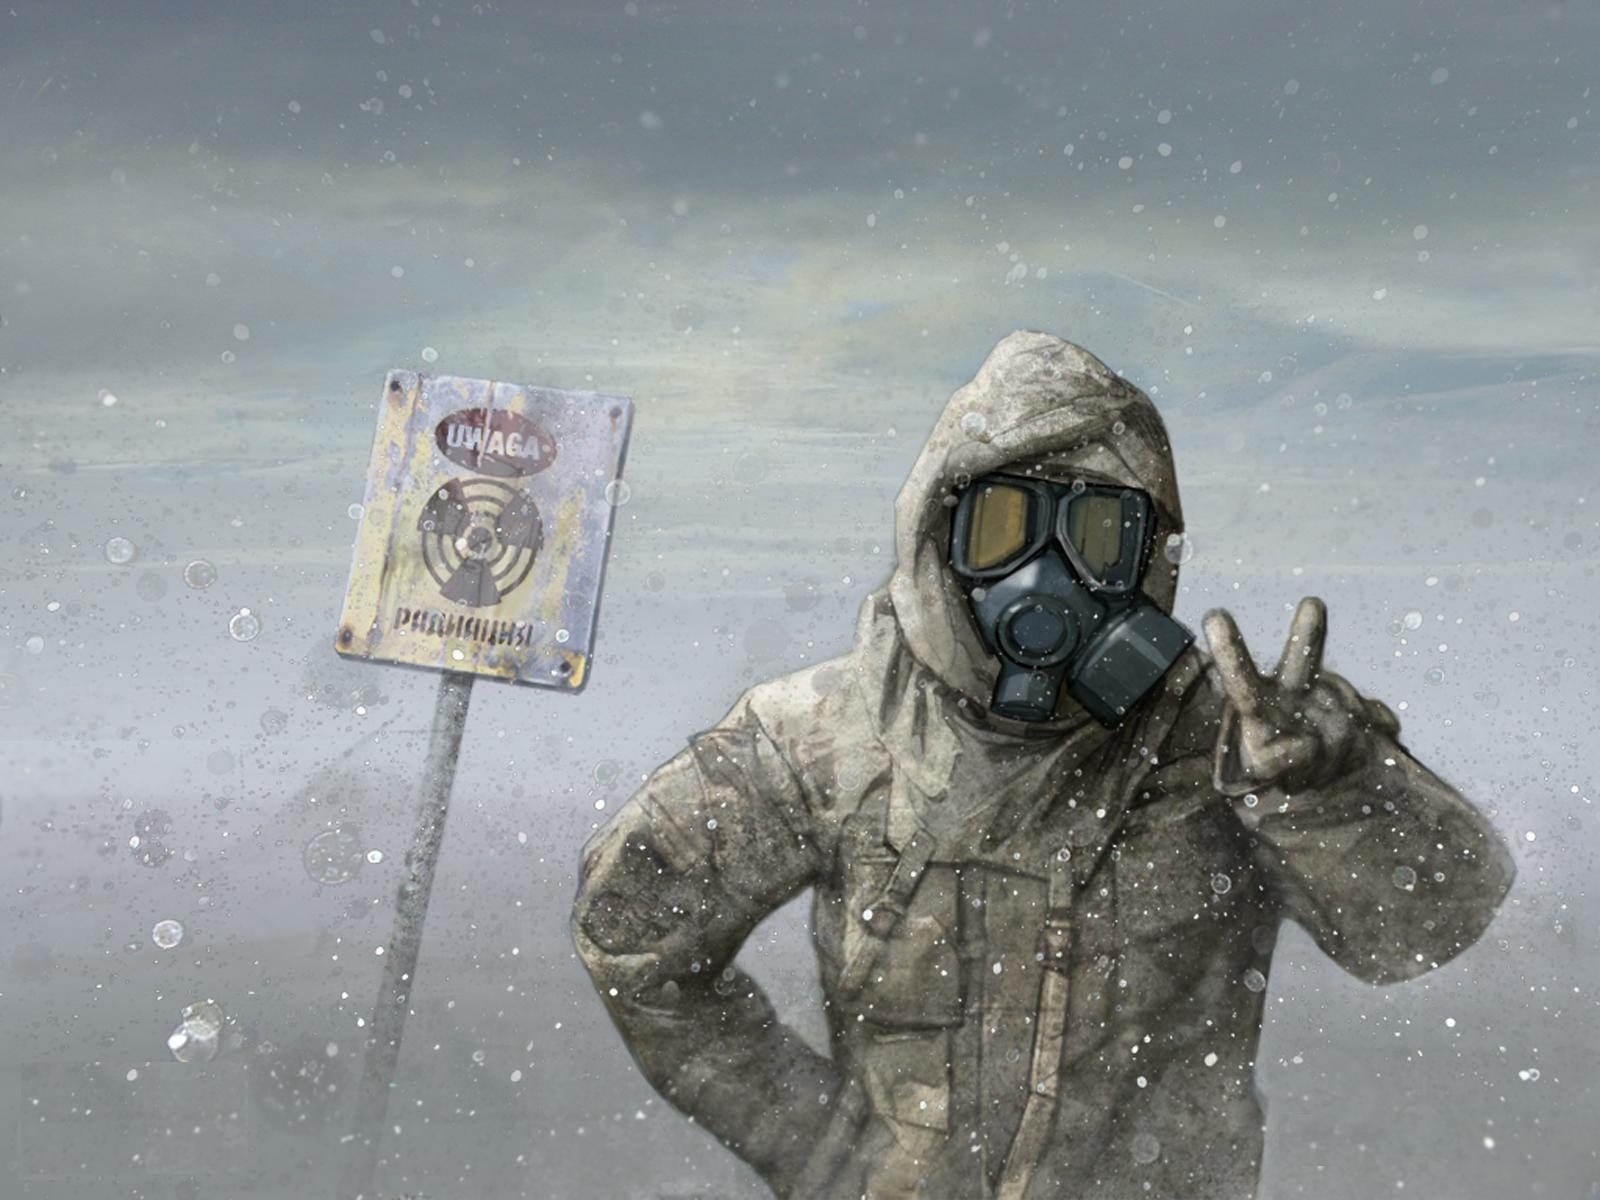 S.T.A.L.K.E.R. Wallpapers